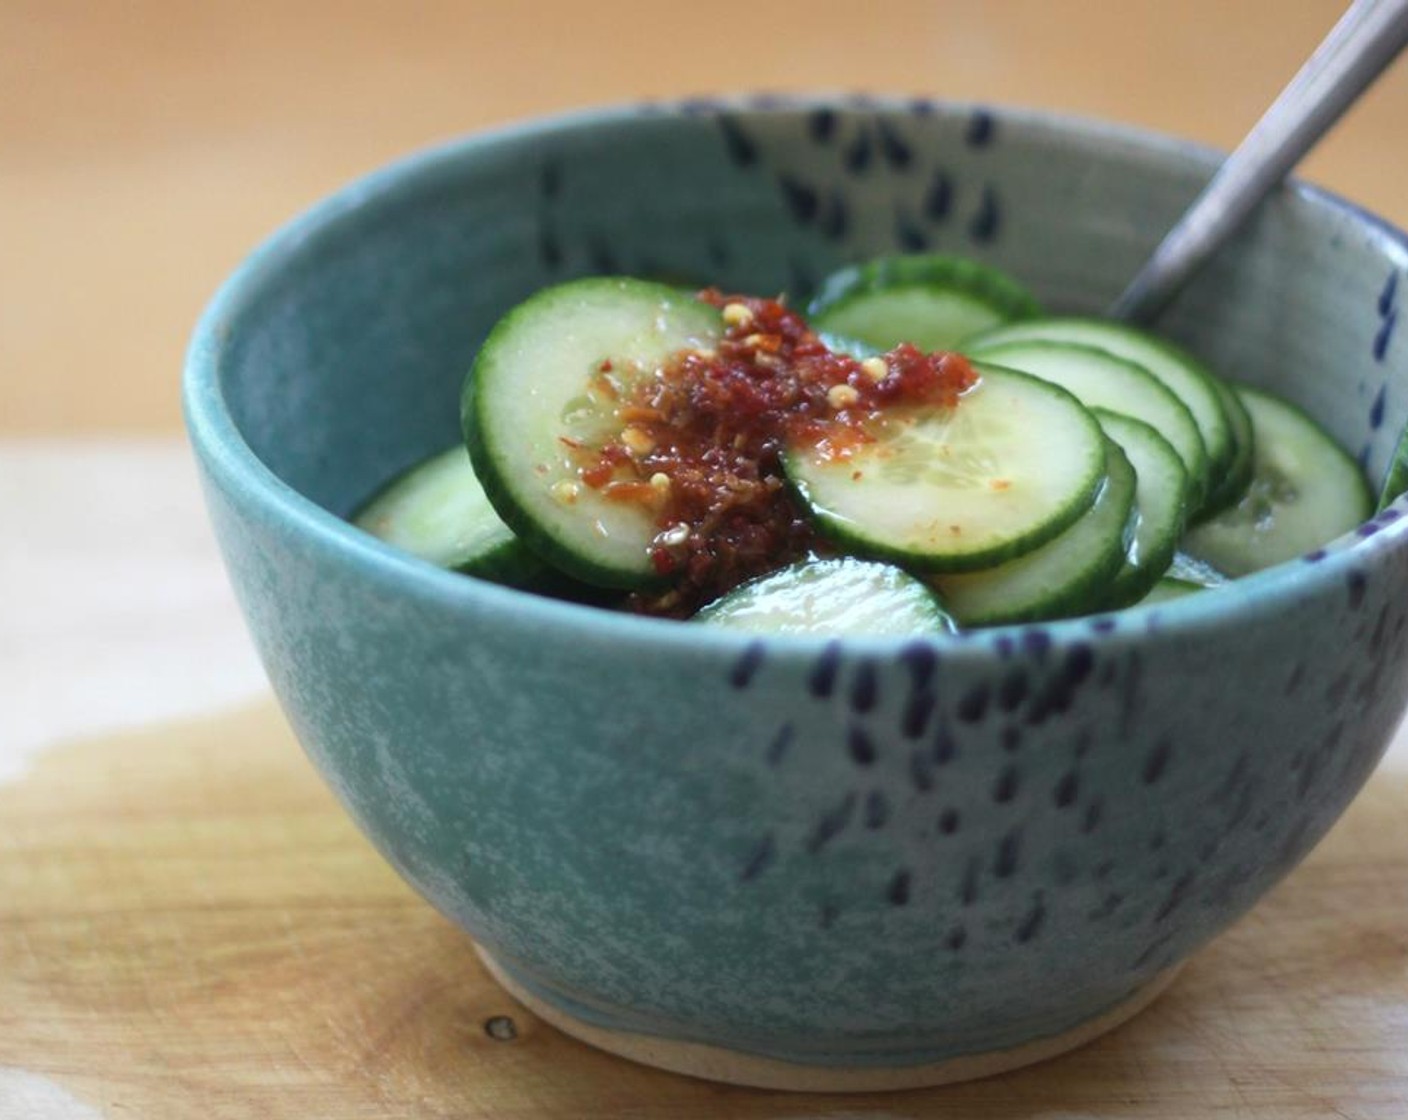 step 1 Pickle the cucumbers. In a large bowl whisk together the Sesame Oil (1 tsp), Rice Vinegar (1/4 cup), Distilled White Vinegar (1/4 cup), Honey (1 Tbsp), Sriracha (1 Tbsp). Add the English Cucumber (1) and let sit at least 30 minutes, but the longer the better.